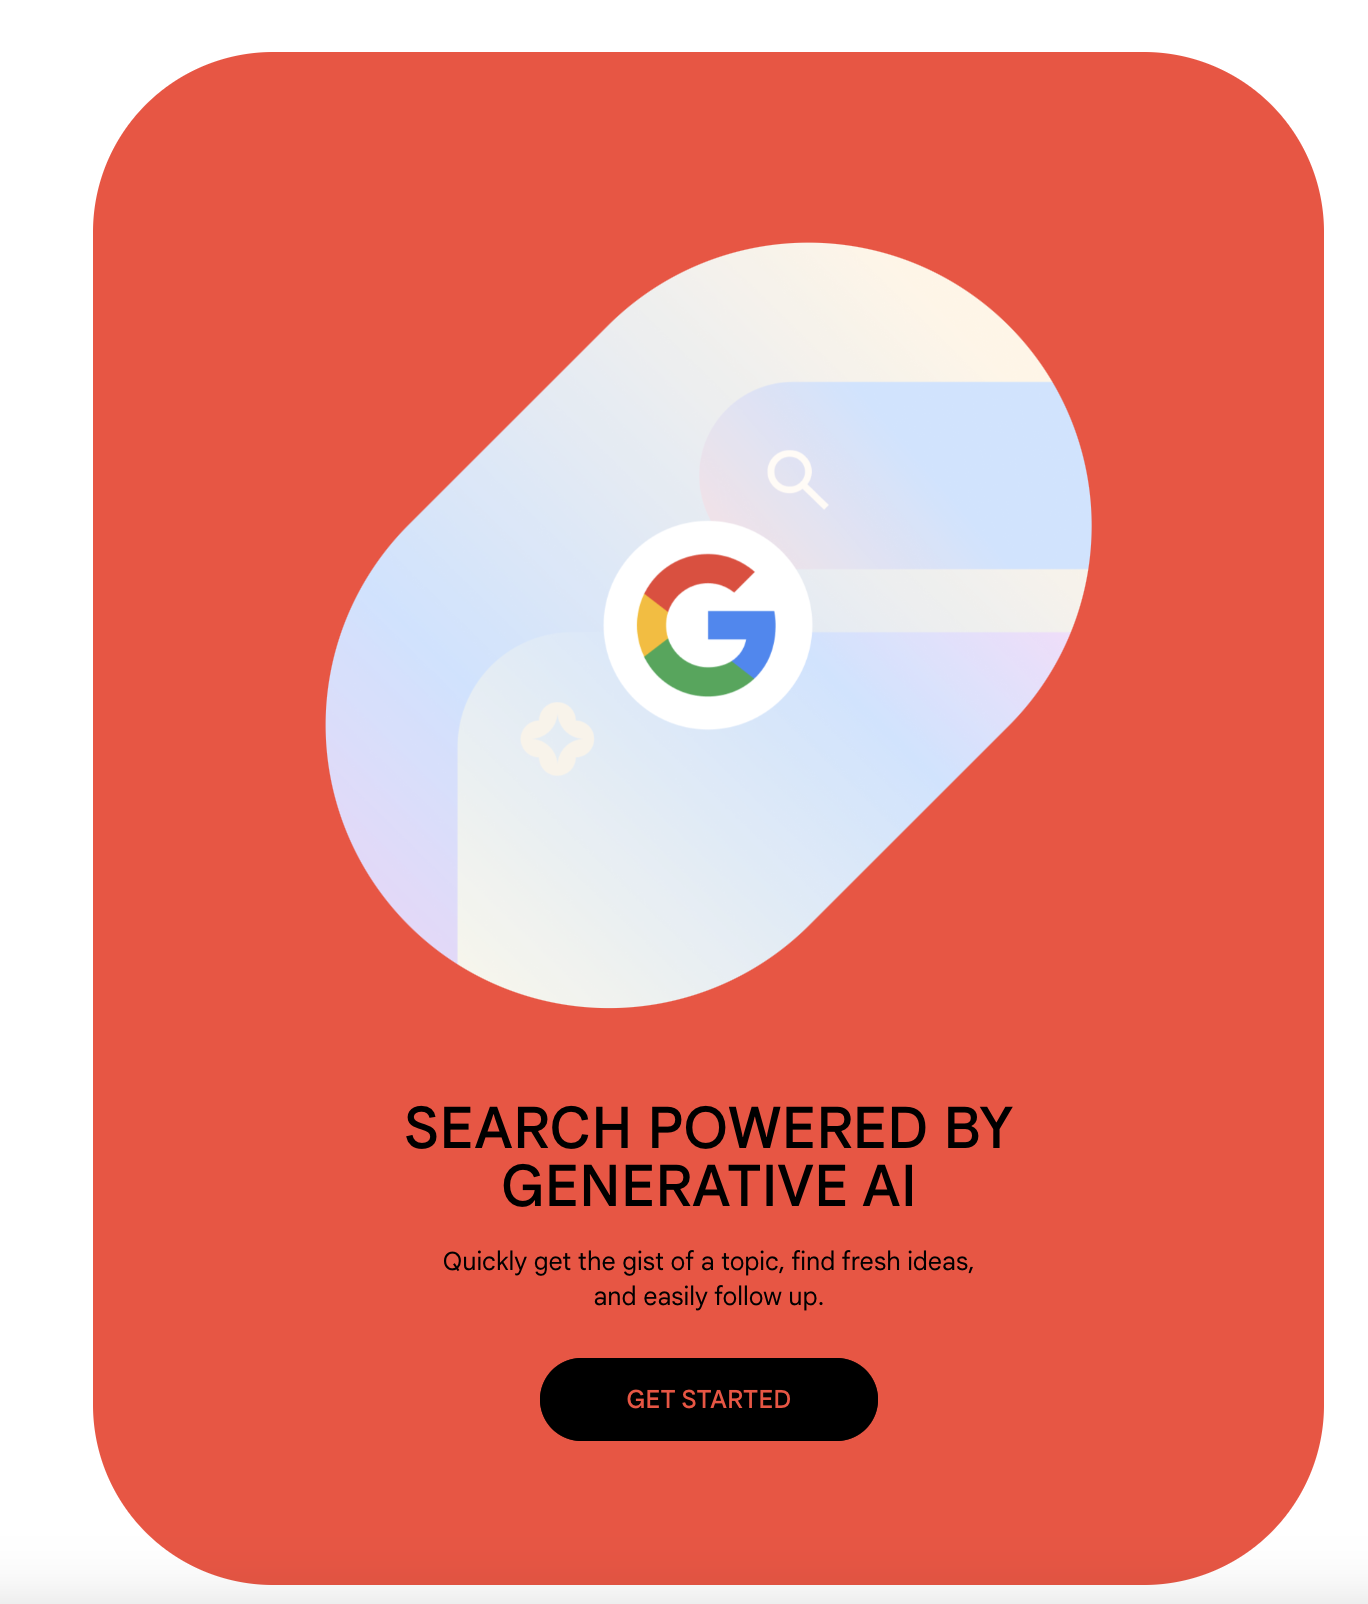 Search Powered by Generative AI